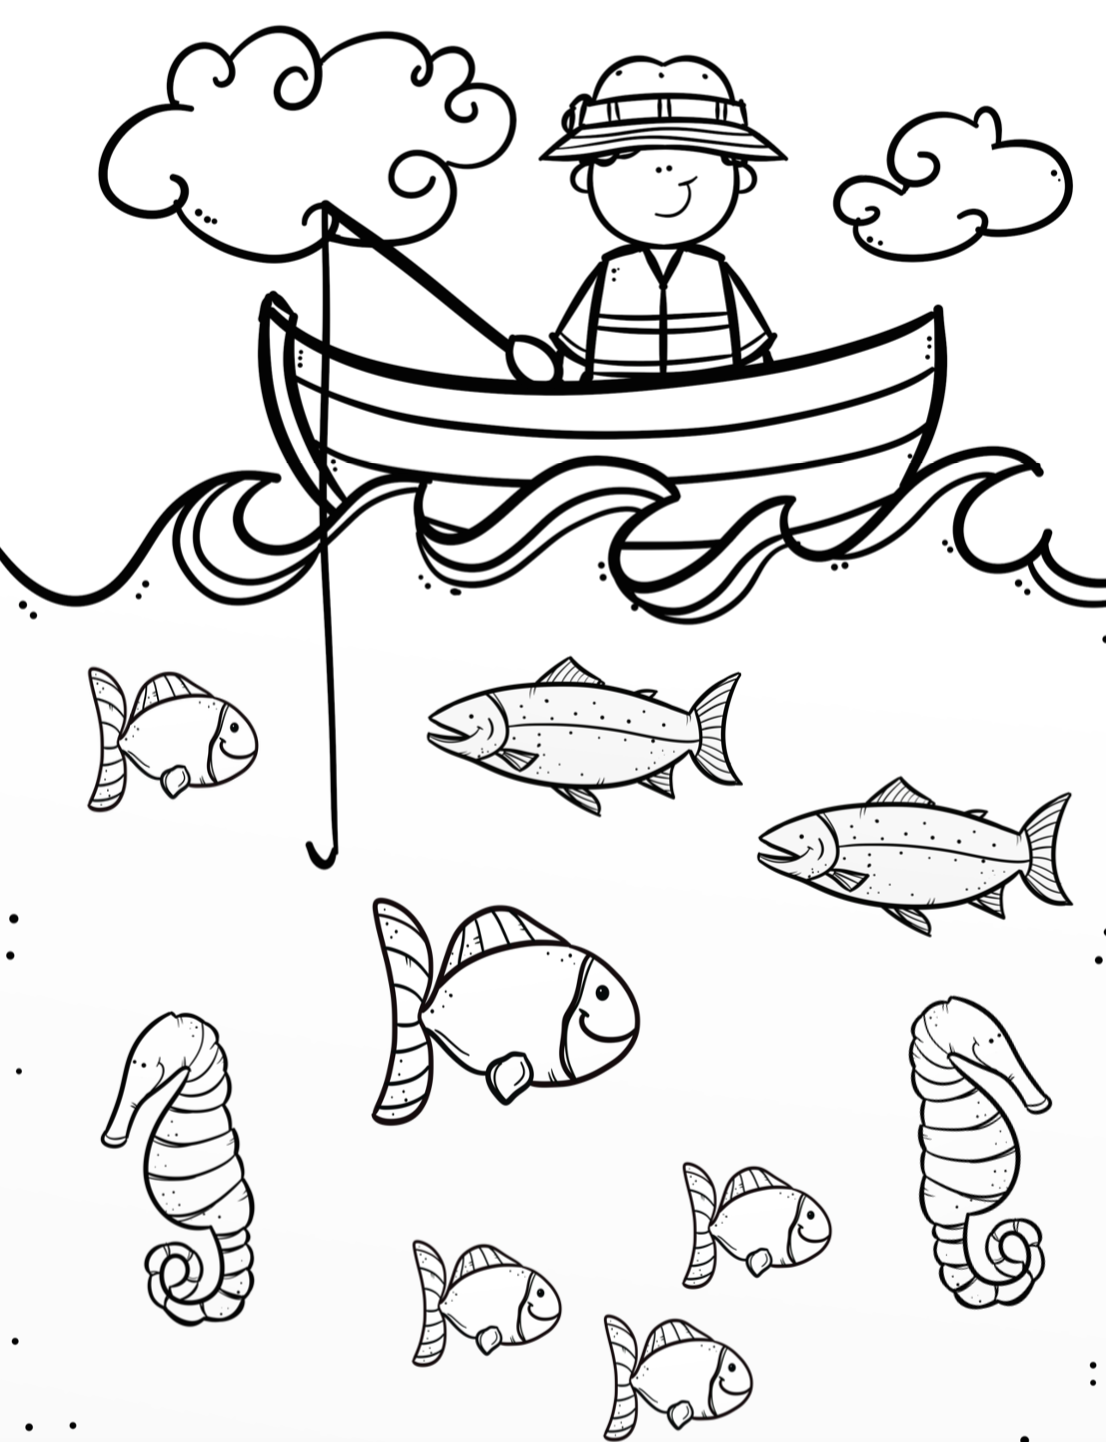 Summer Ocean Coloring Pages (Pdf) - Kid Activities With Alexa